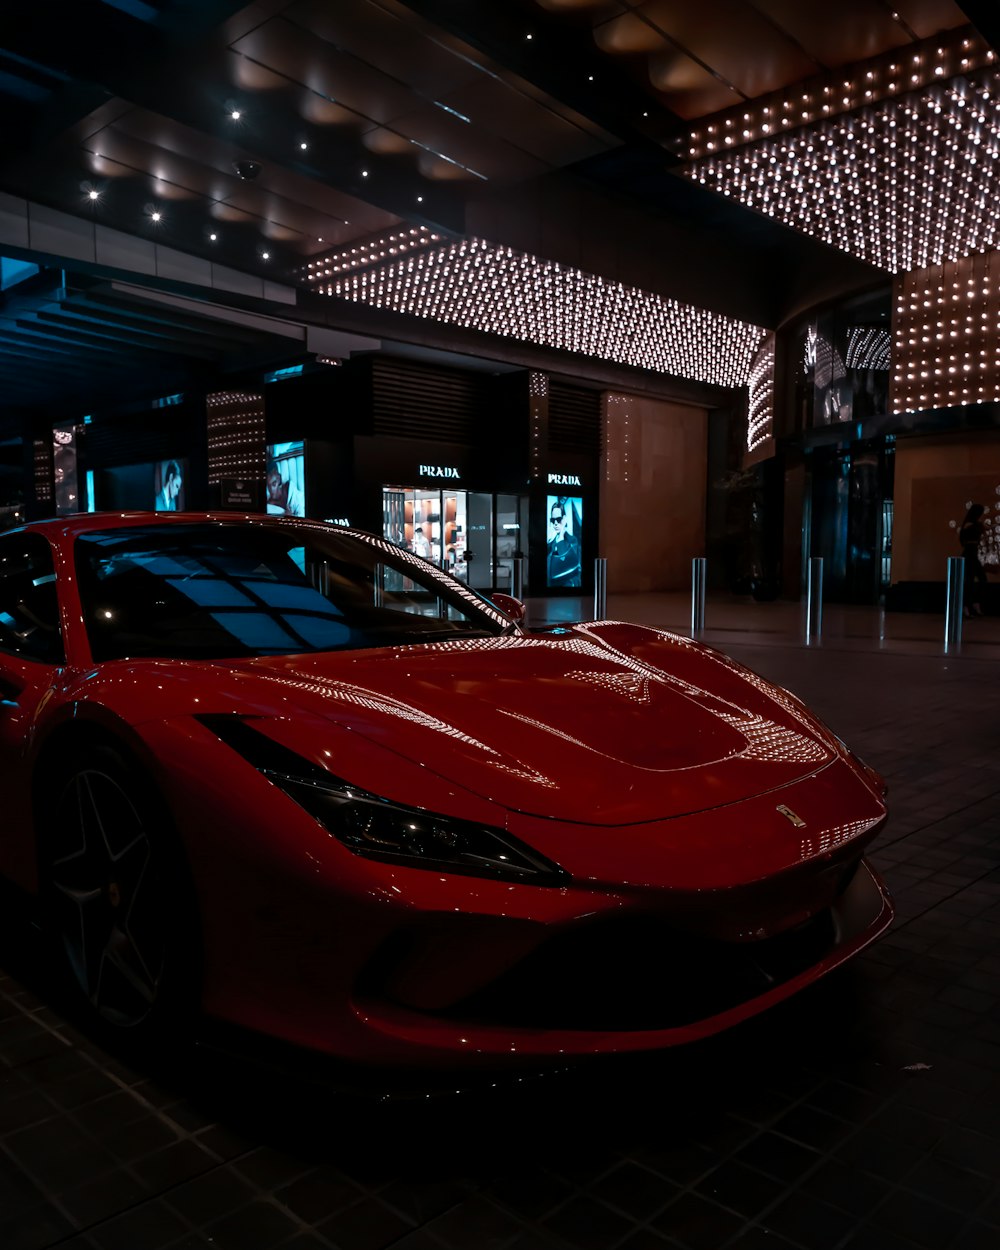 red ferrari 458 italia parked in front of store